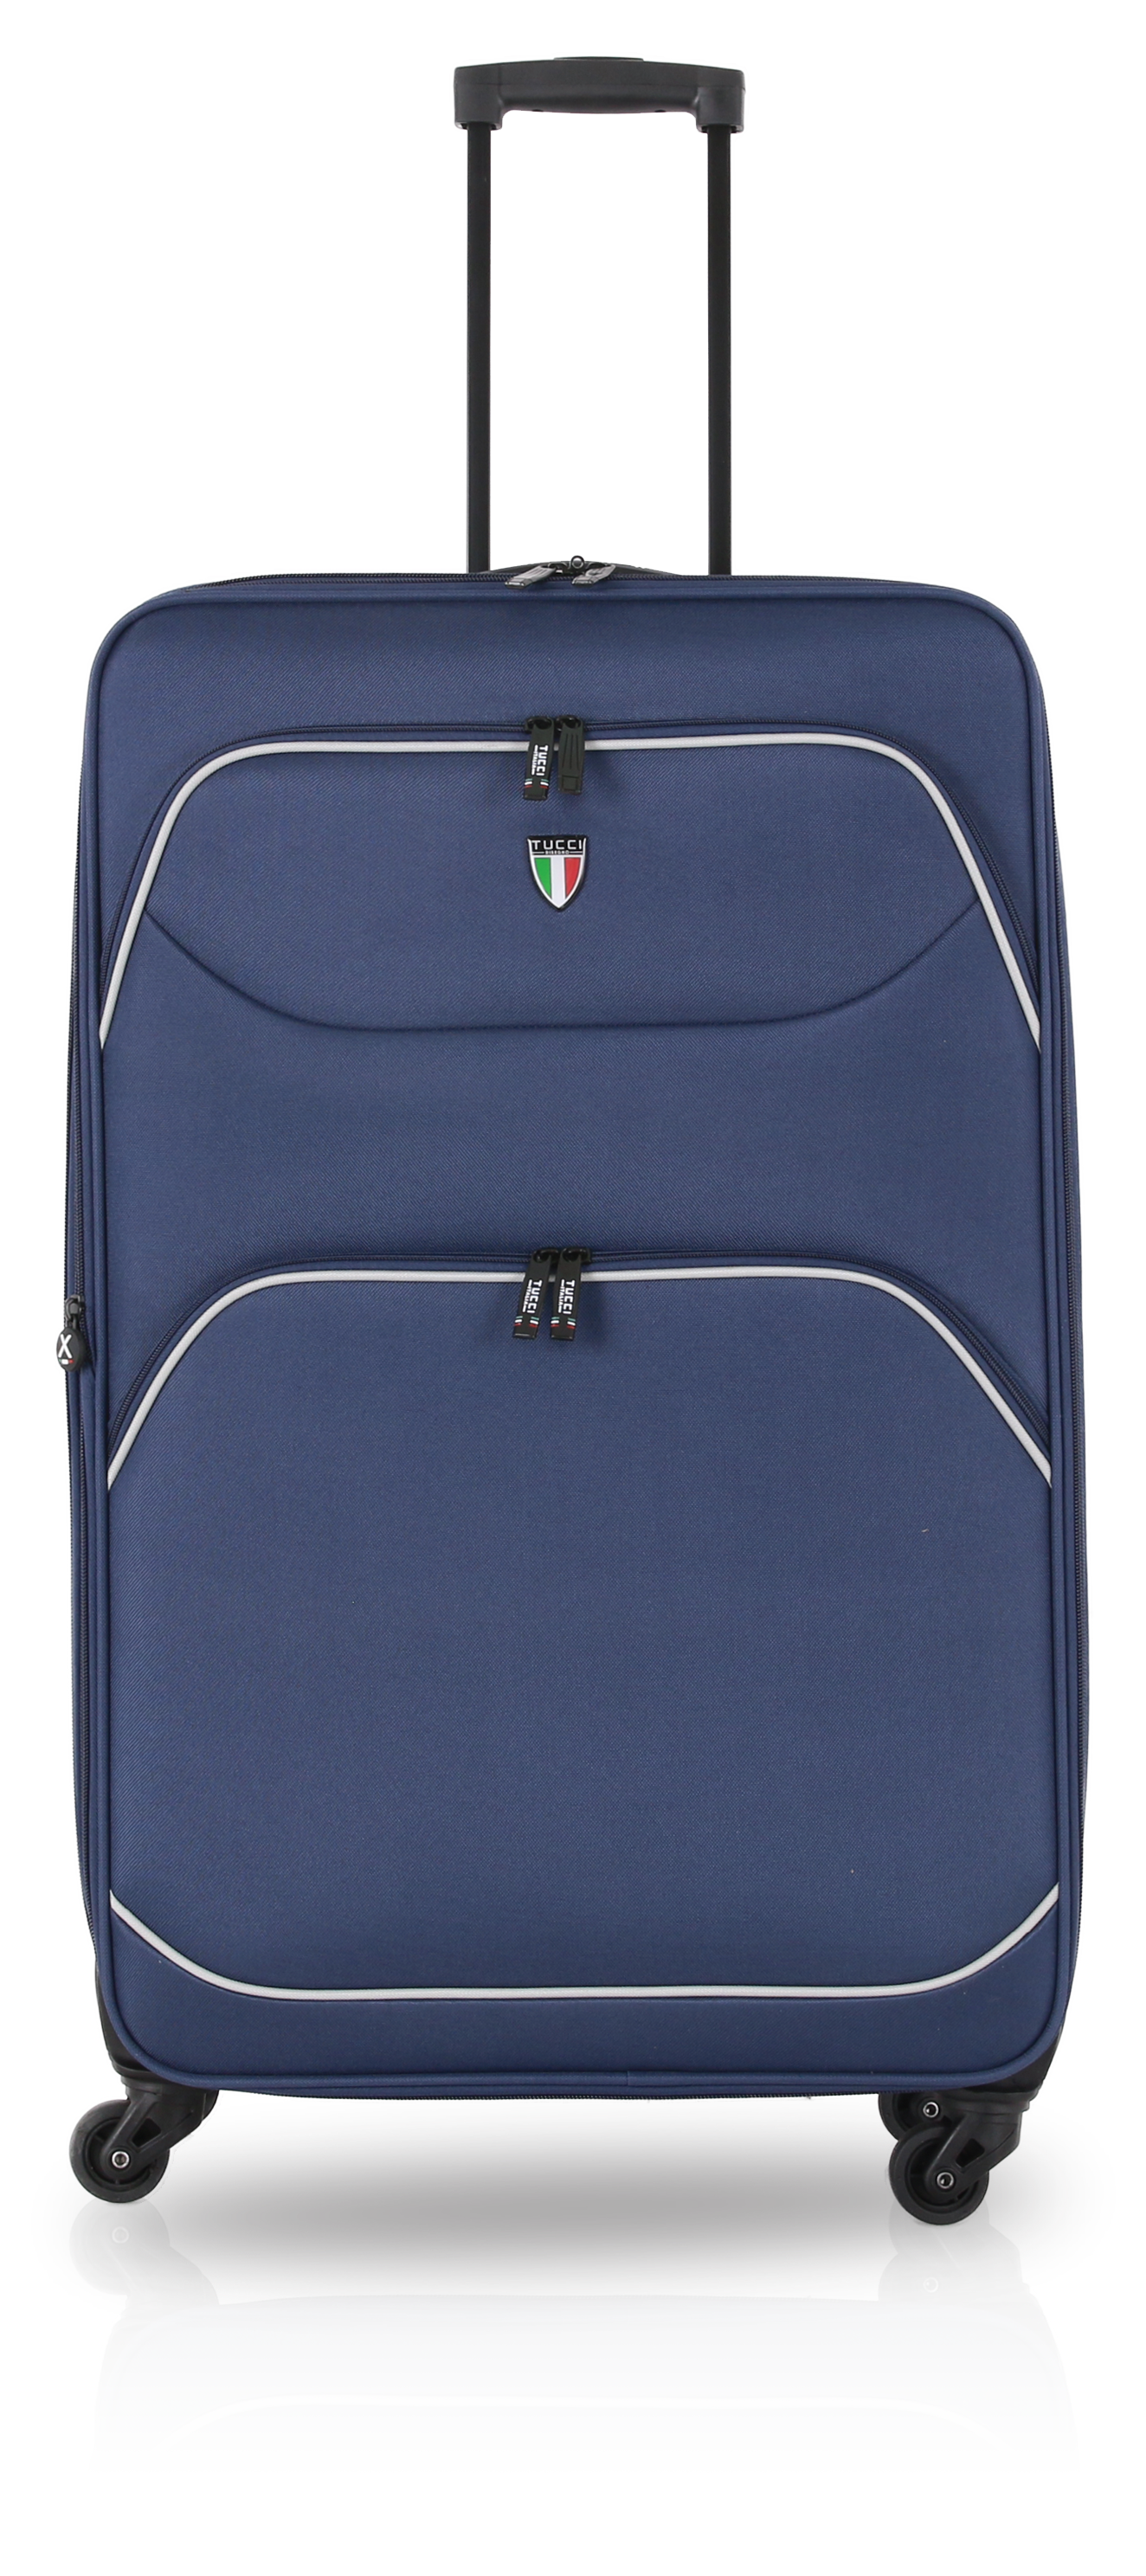 TUCCI BEN FATTO FABRIC 20" Carry On Luggage